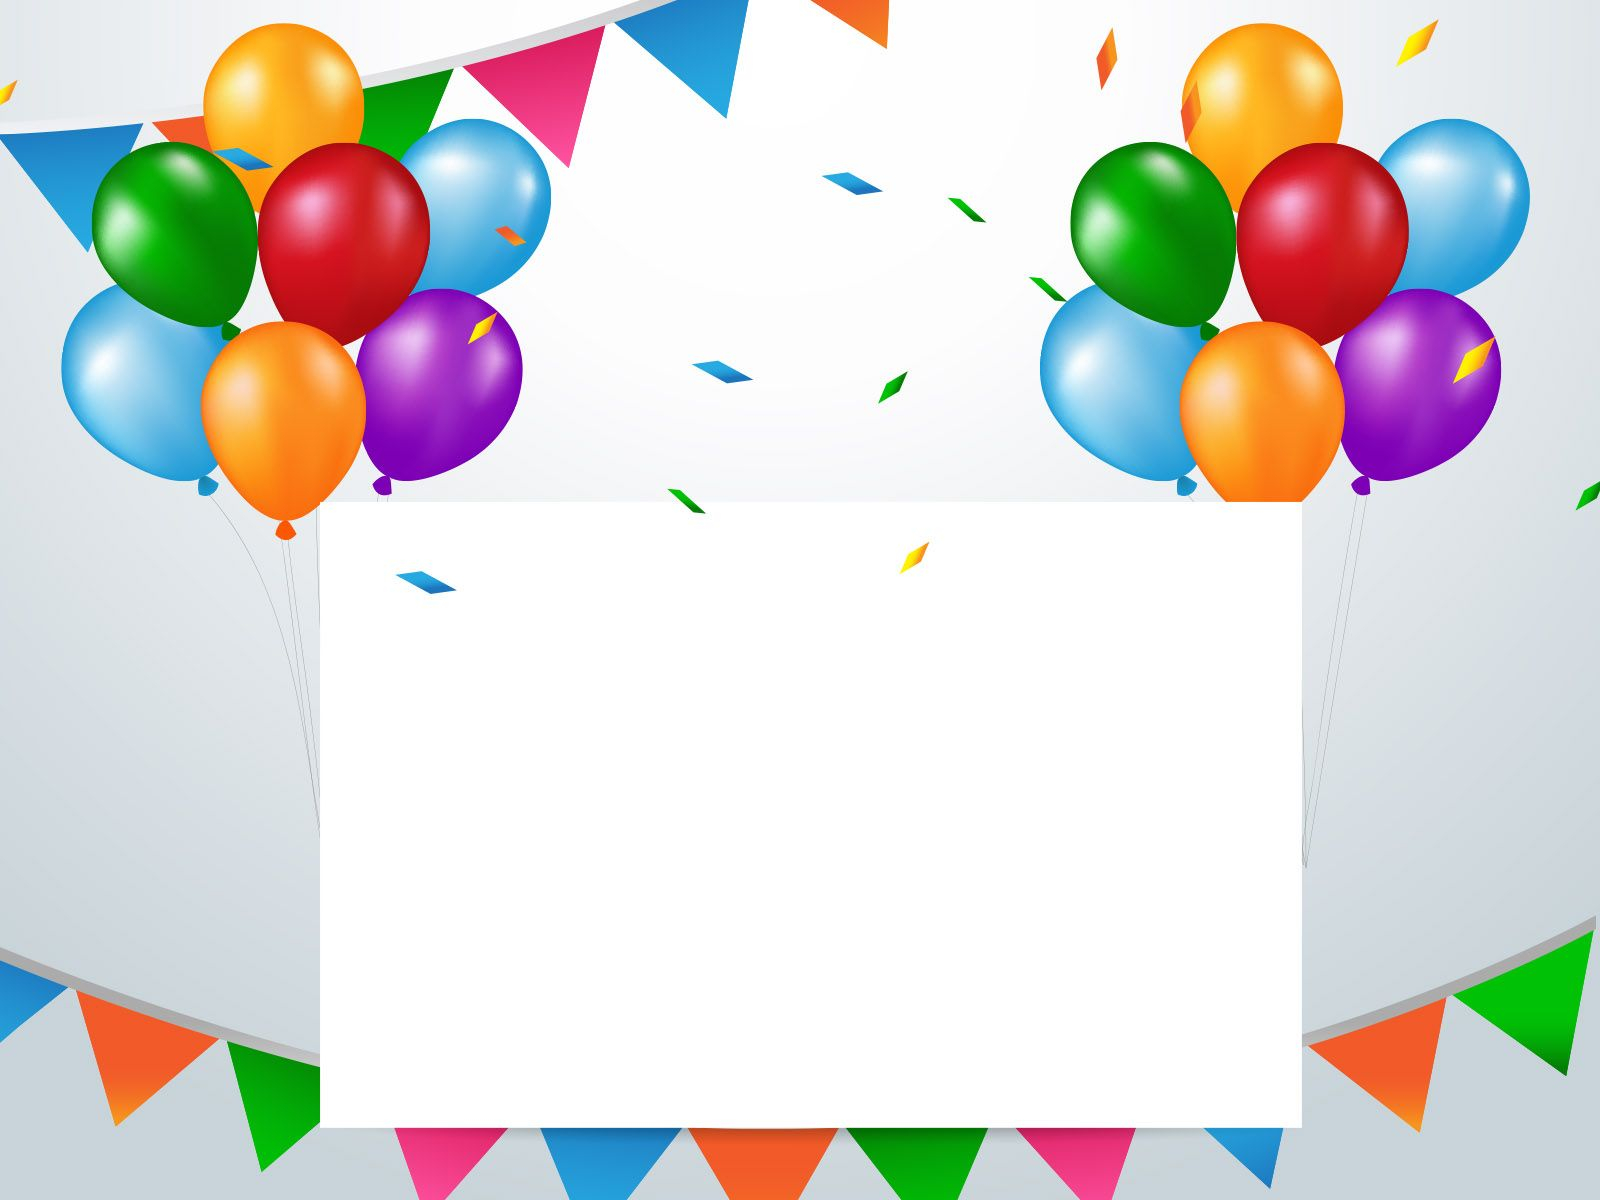 This Colourful Birthday Balloons Powerpoint Background Designed For for dimensions 1600 X 1200